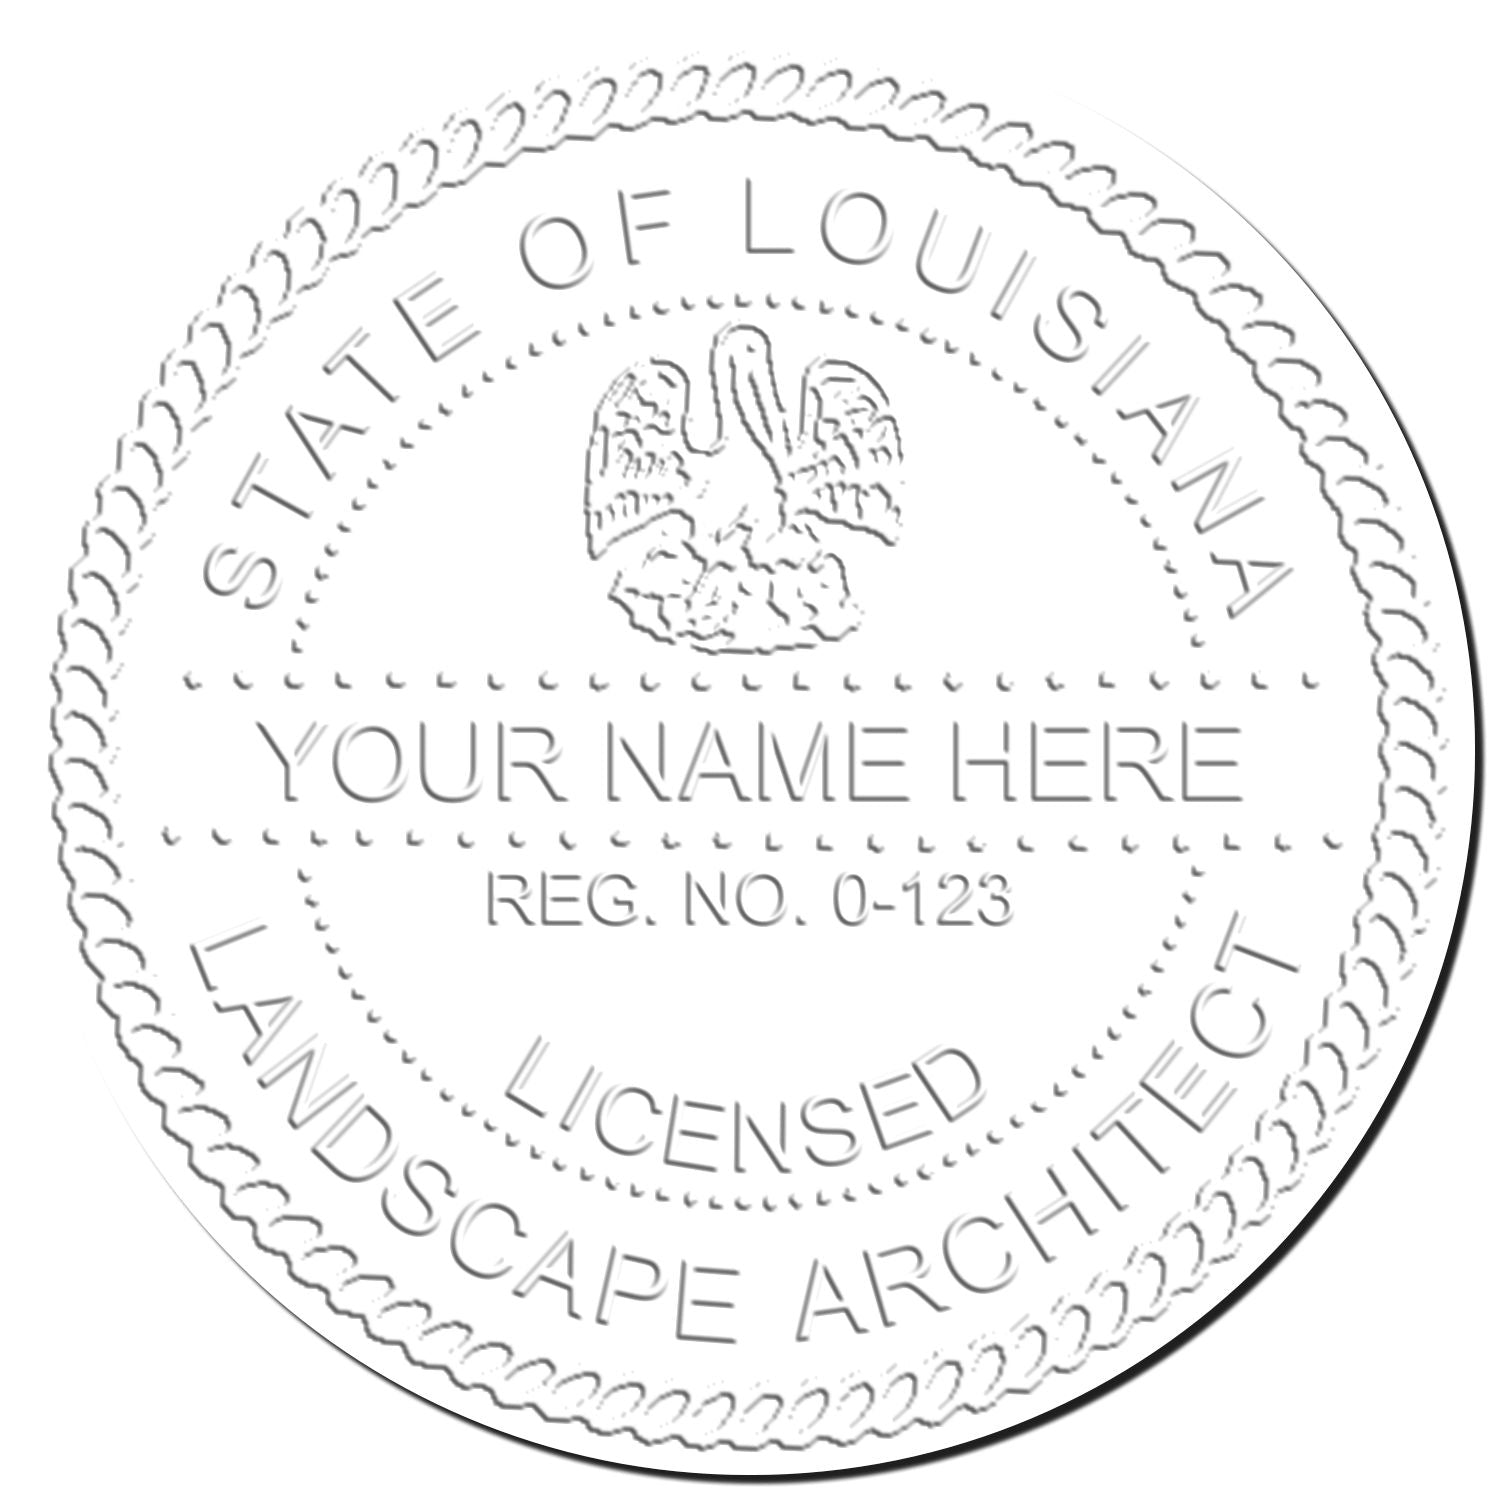 This paper is stamped with a sample imprint of the Hybrid Louisiana Landscape Architect Seal, signifying its quality and reliability.